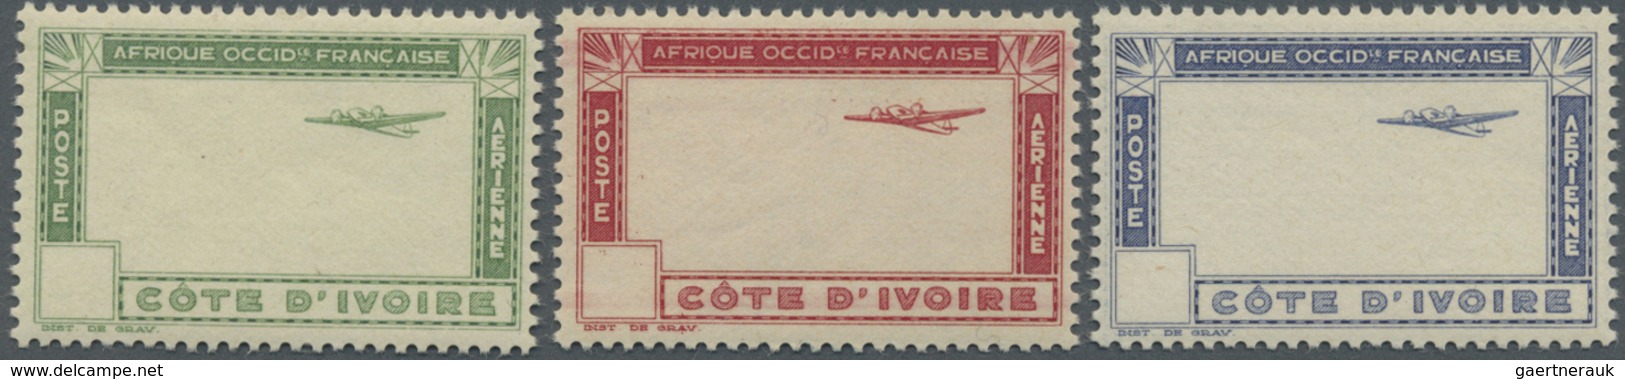 ** Elfenbeinküste: 1942, Airmails, Design "Plane And Camel Caravan", Group Of Three Perf. Stage Proofs - Lettres & Documents